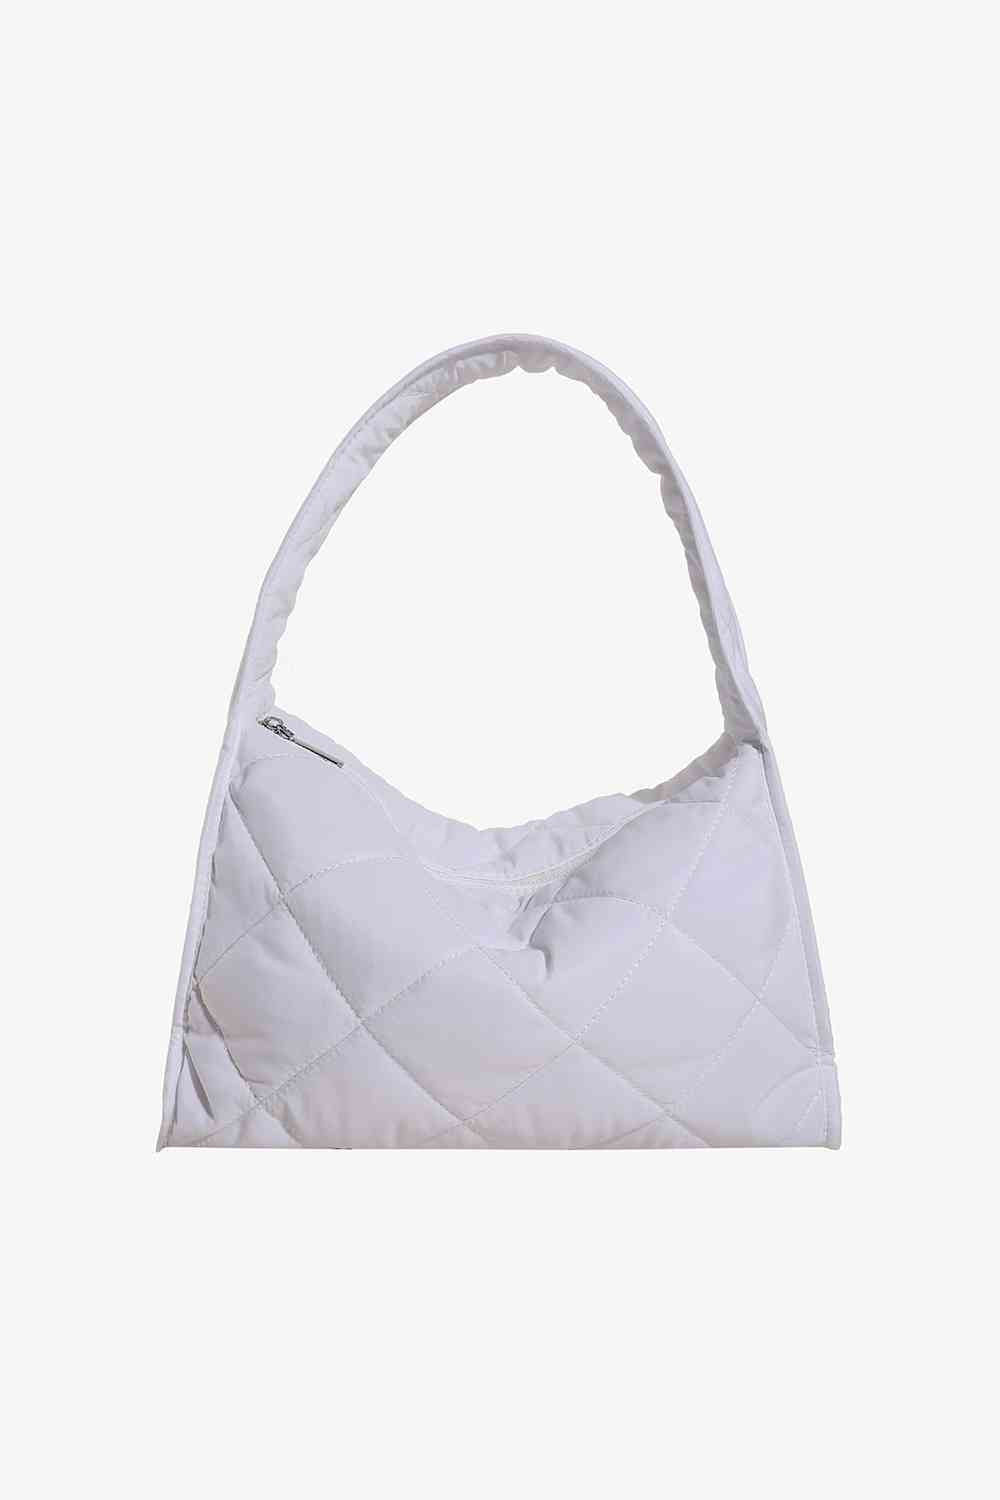 Nylon Shoulder Bag - White / One Size - All Products - Handbags - 12 - 2024